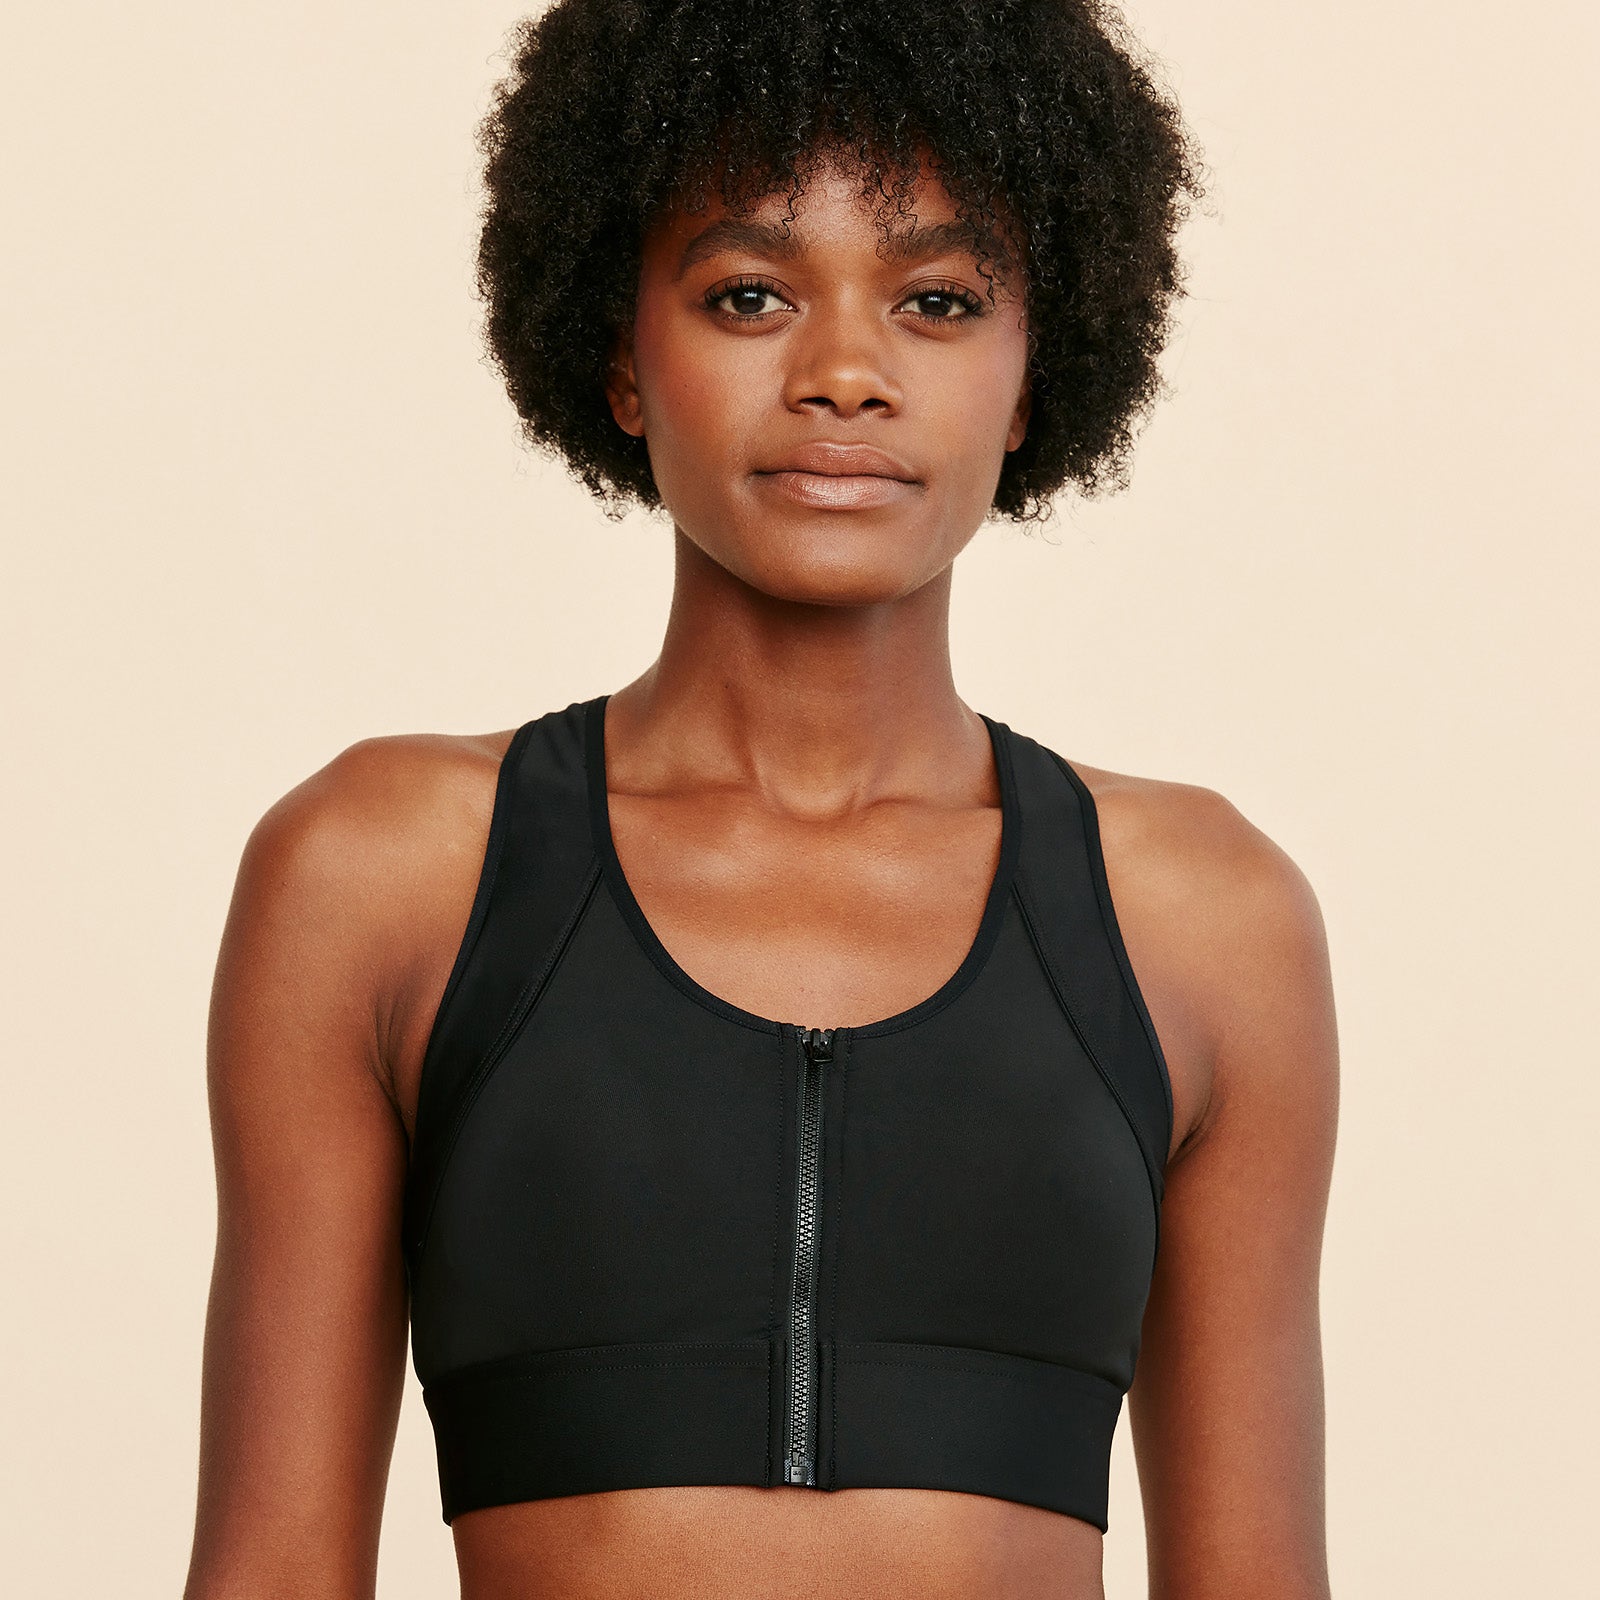 Lemorosy Women's Post-Surgical Front Closure Sports Bra Wirefree